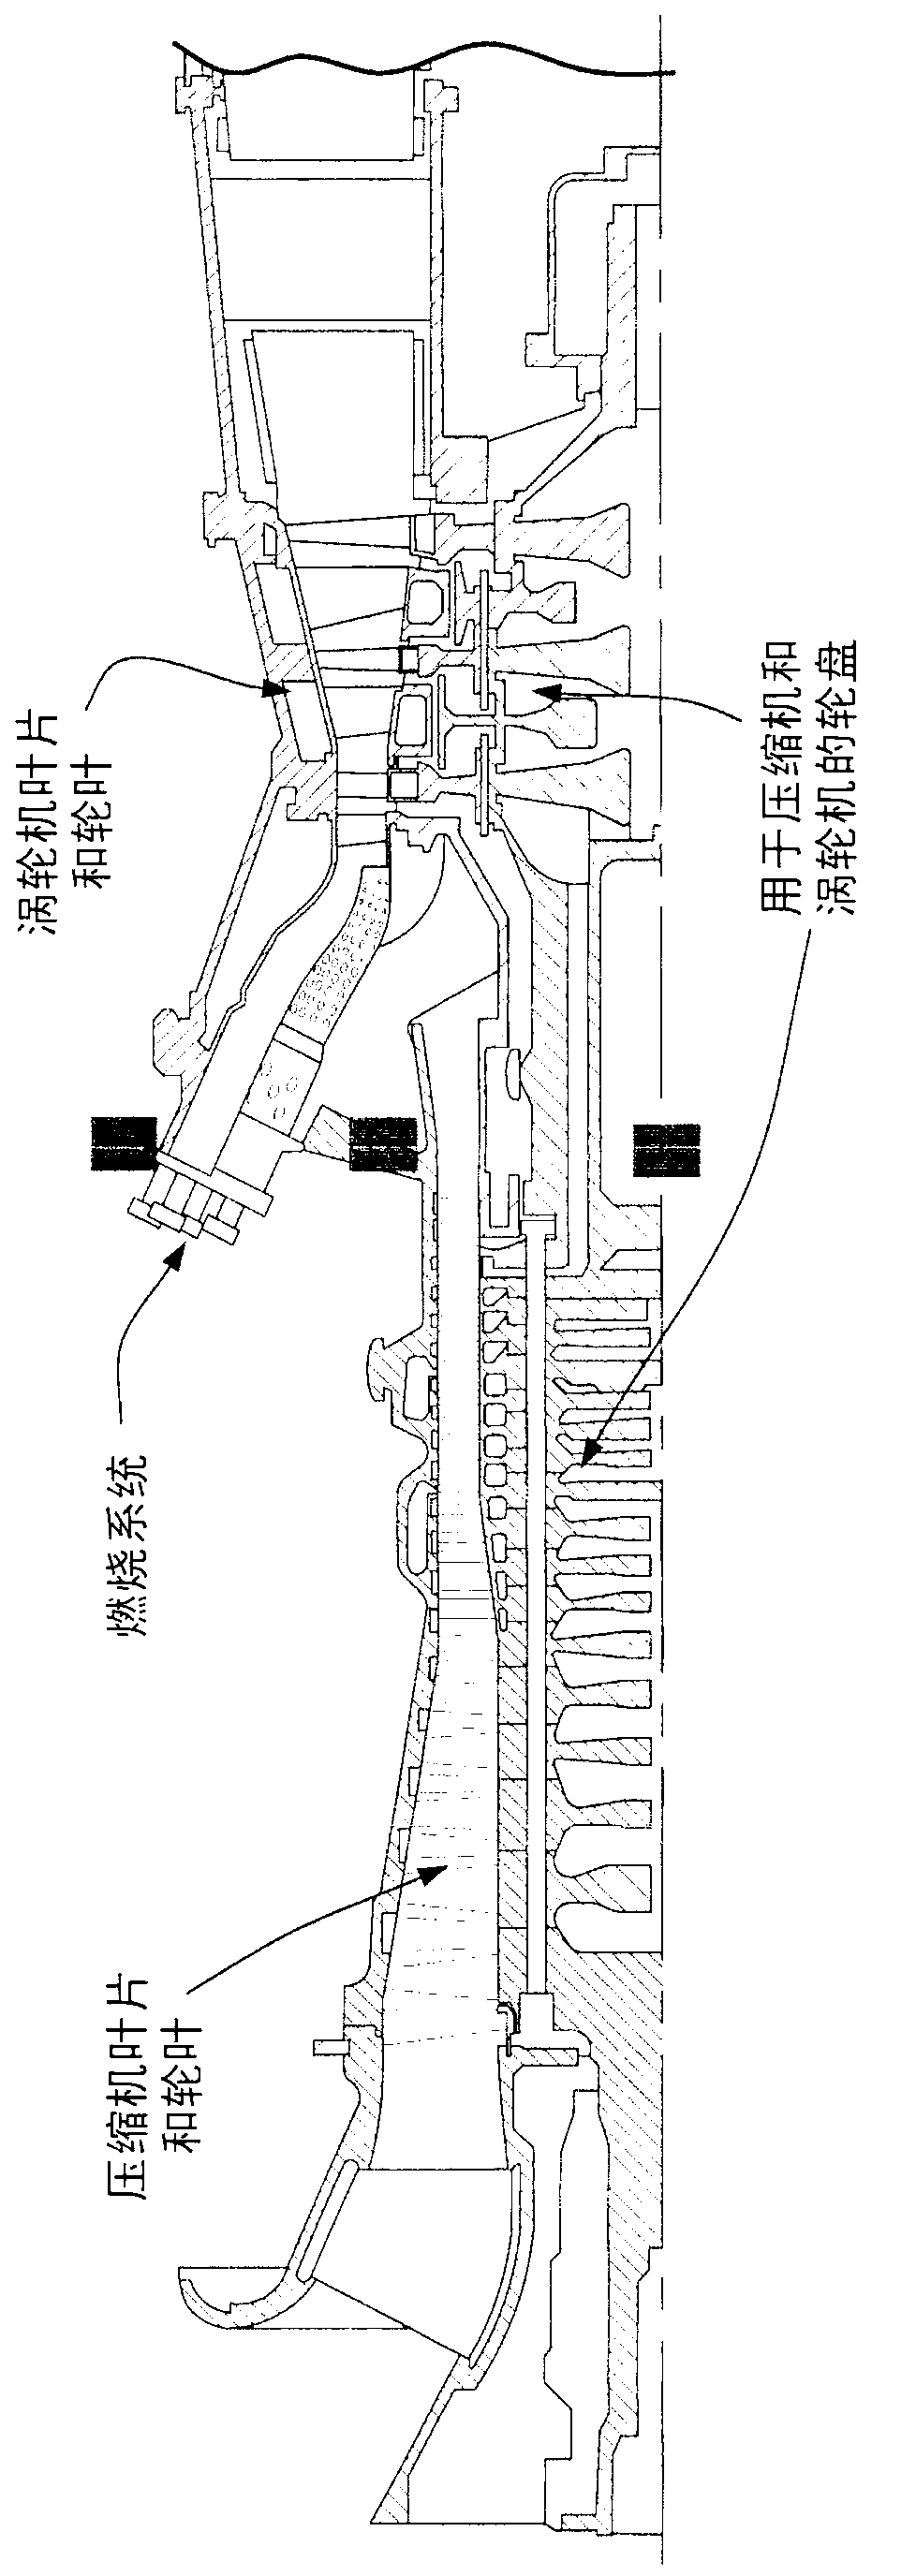 In-situ gas turbine rotor blade and casing clearance control method and system